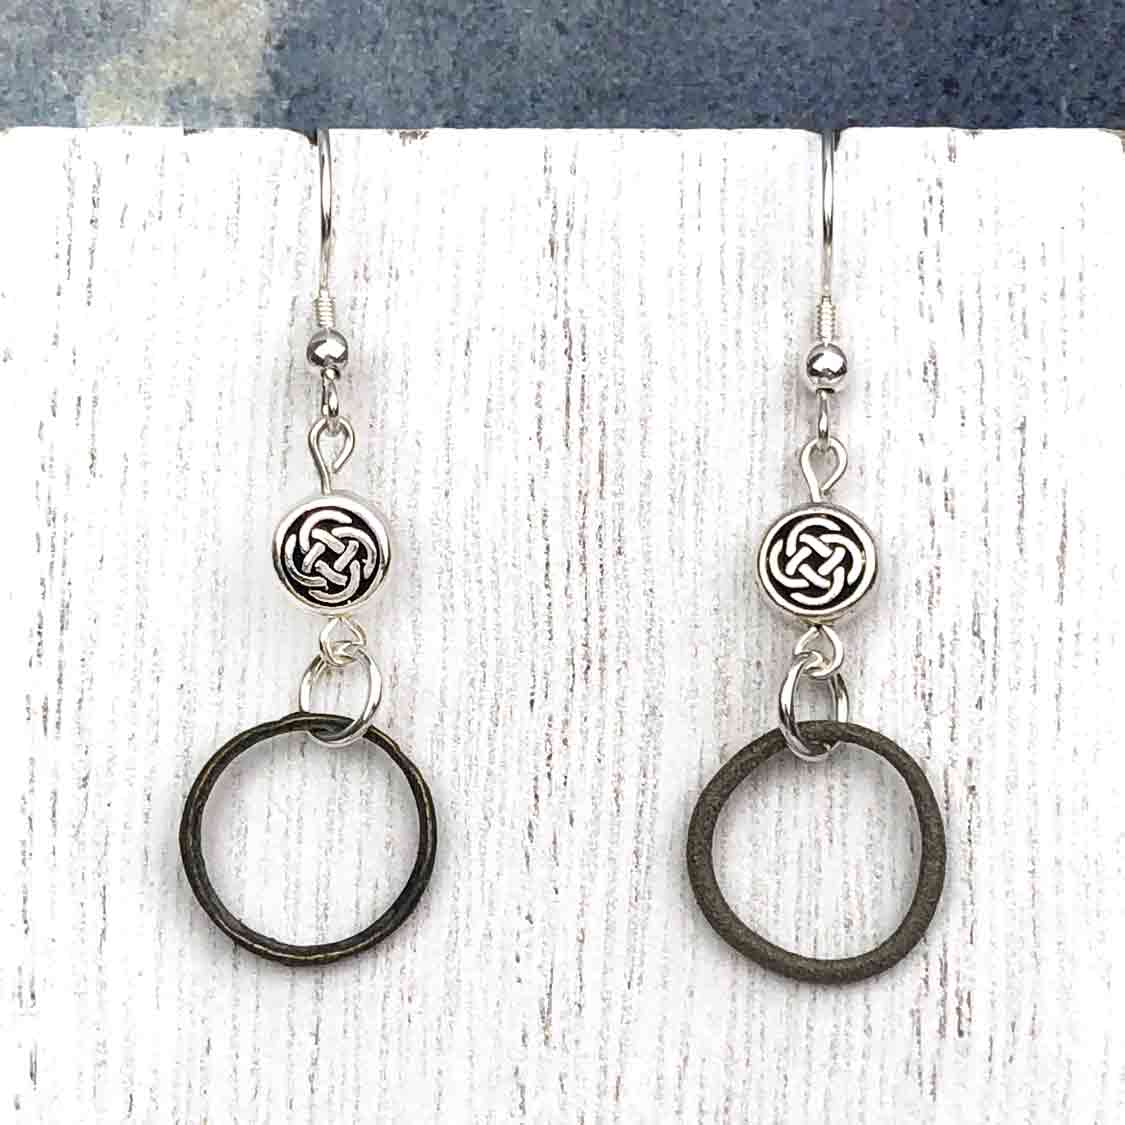 Tiny Deep Bronze Celtic Ring Money Earrings with Celtic Knot Charm